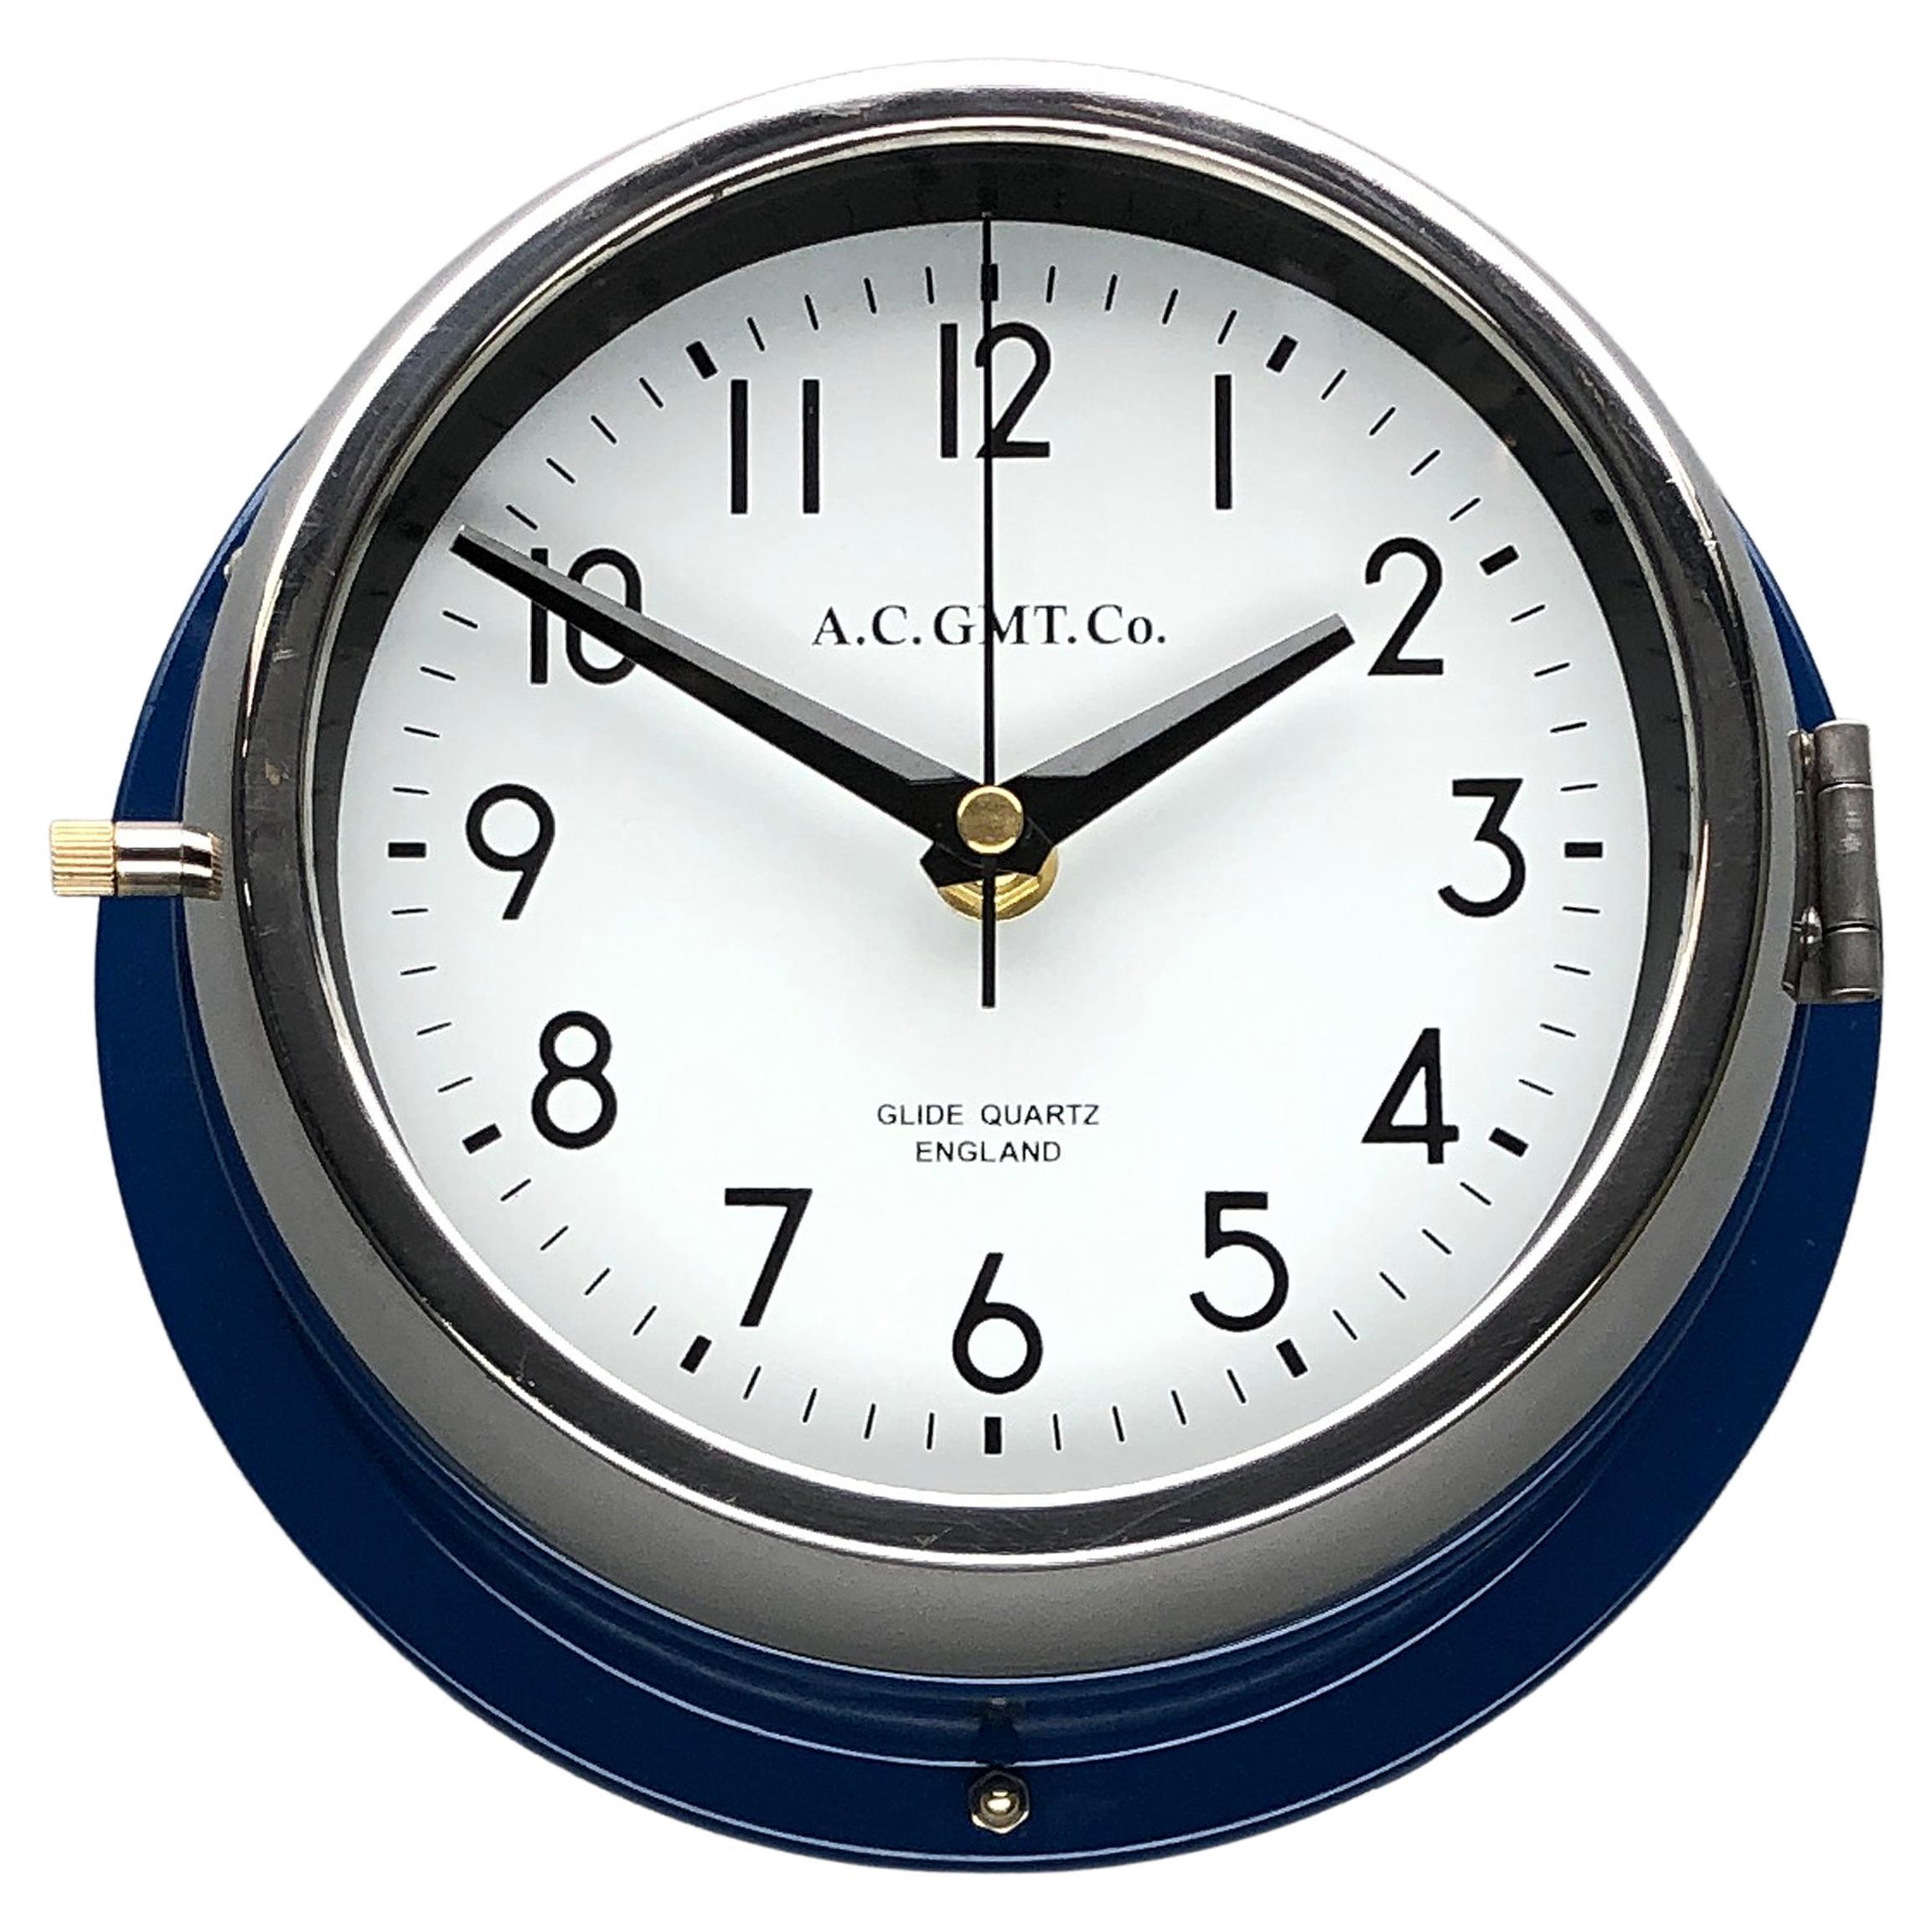 1970s British Classic Blue & Chrome Ac Gmt Co. Industrial Wall Clock White Dial